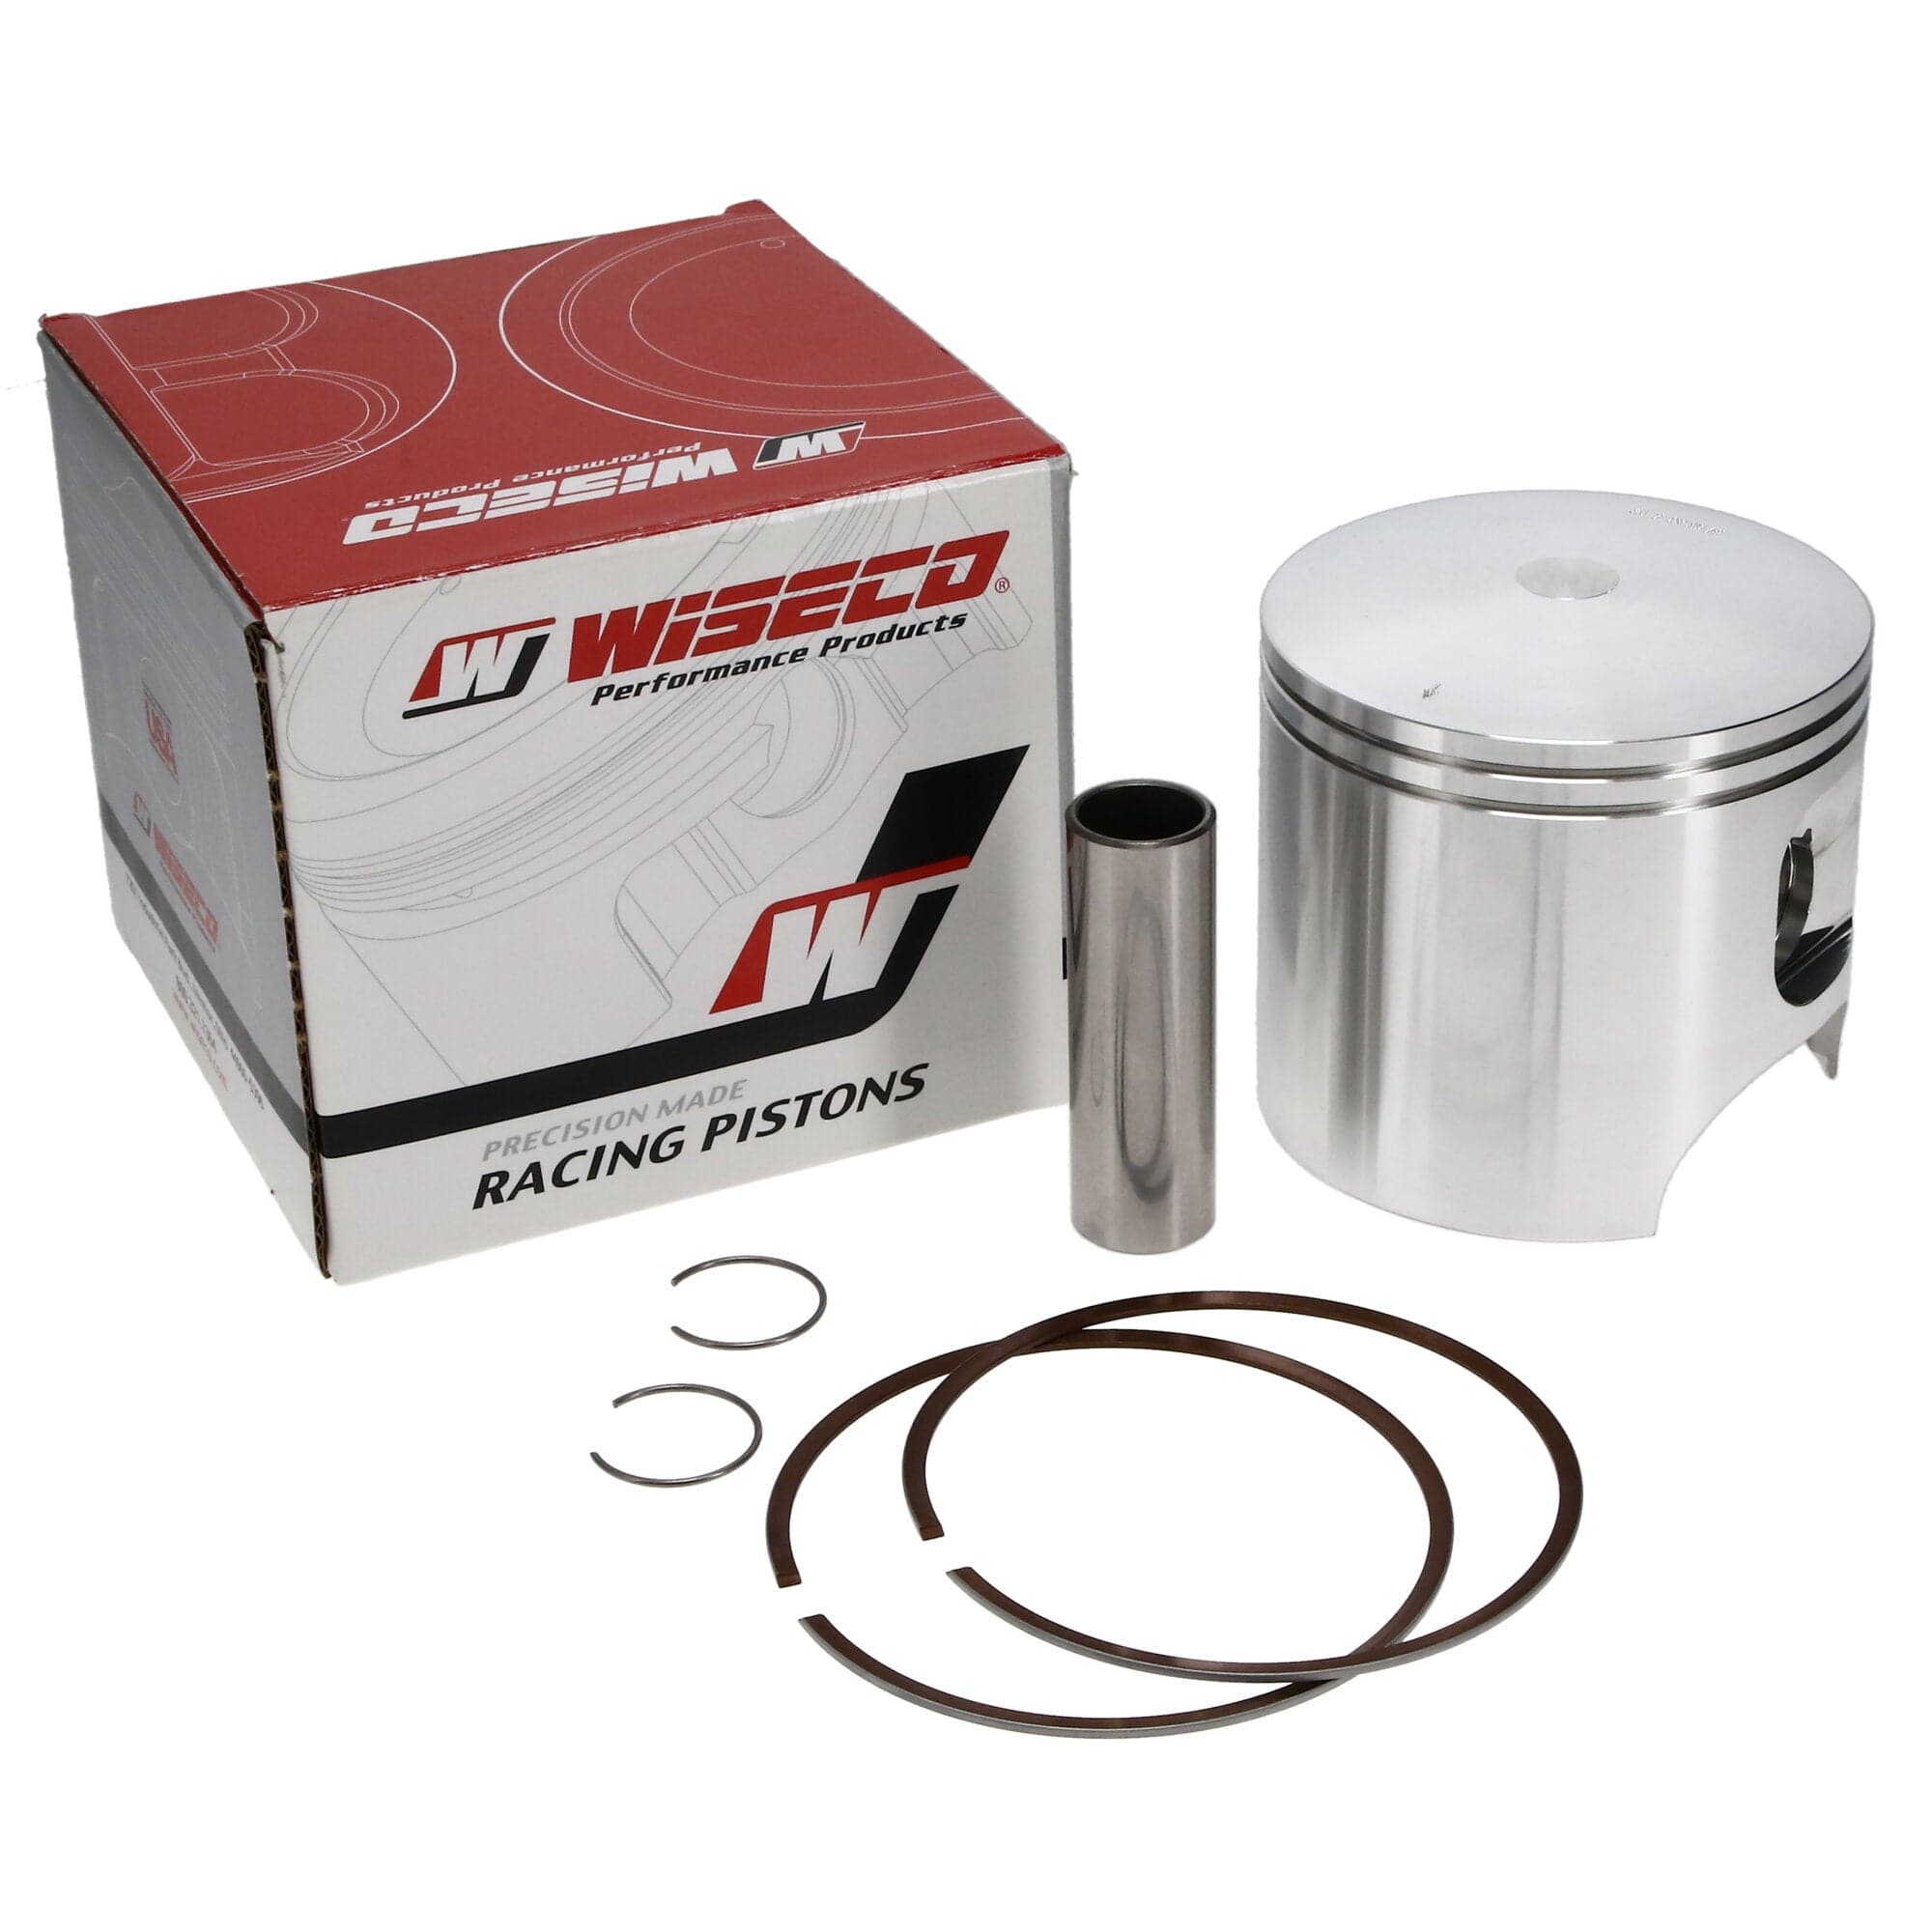 Wiseco- Forged Piston for Sea-Doo '04-12 RXP, RXP-X, RXT, RXT-X